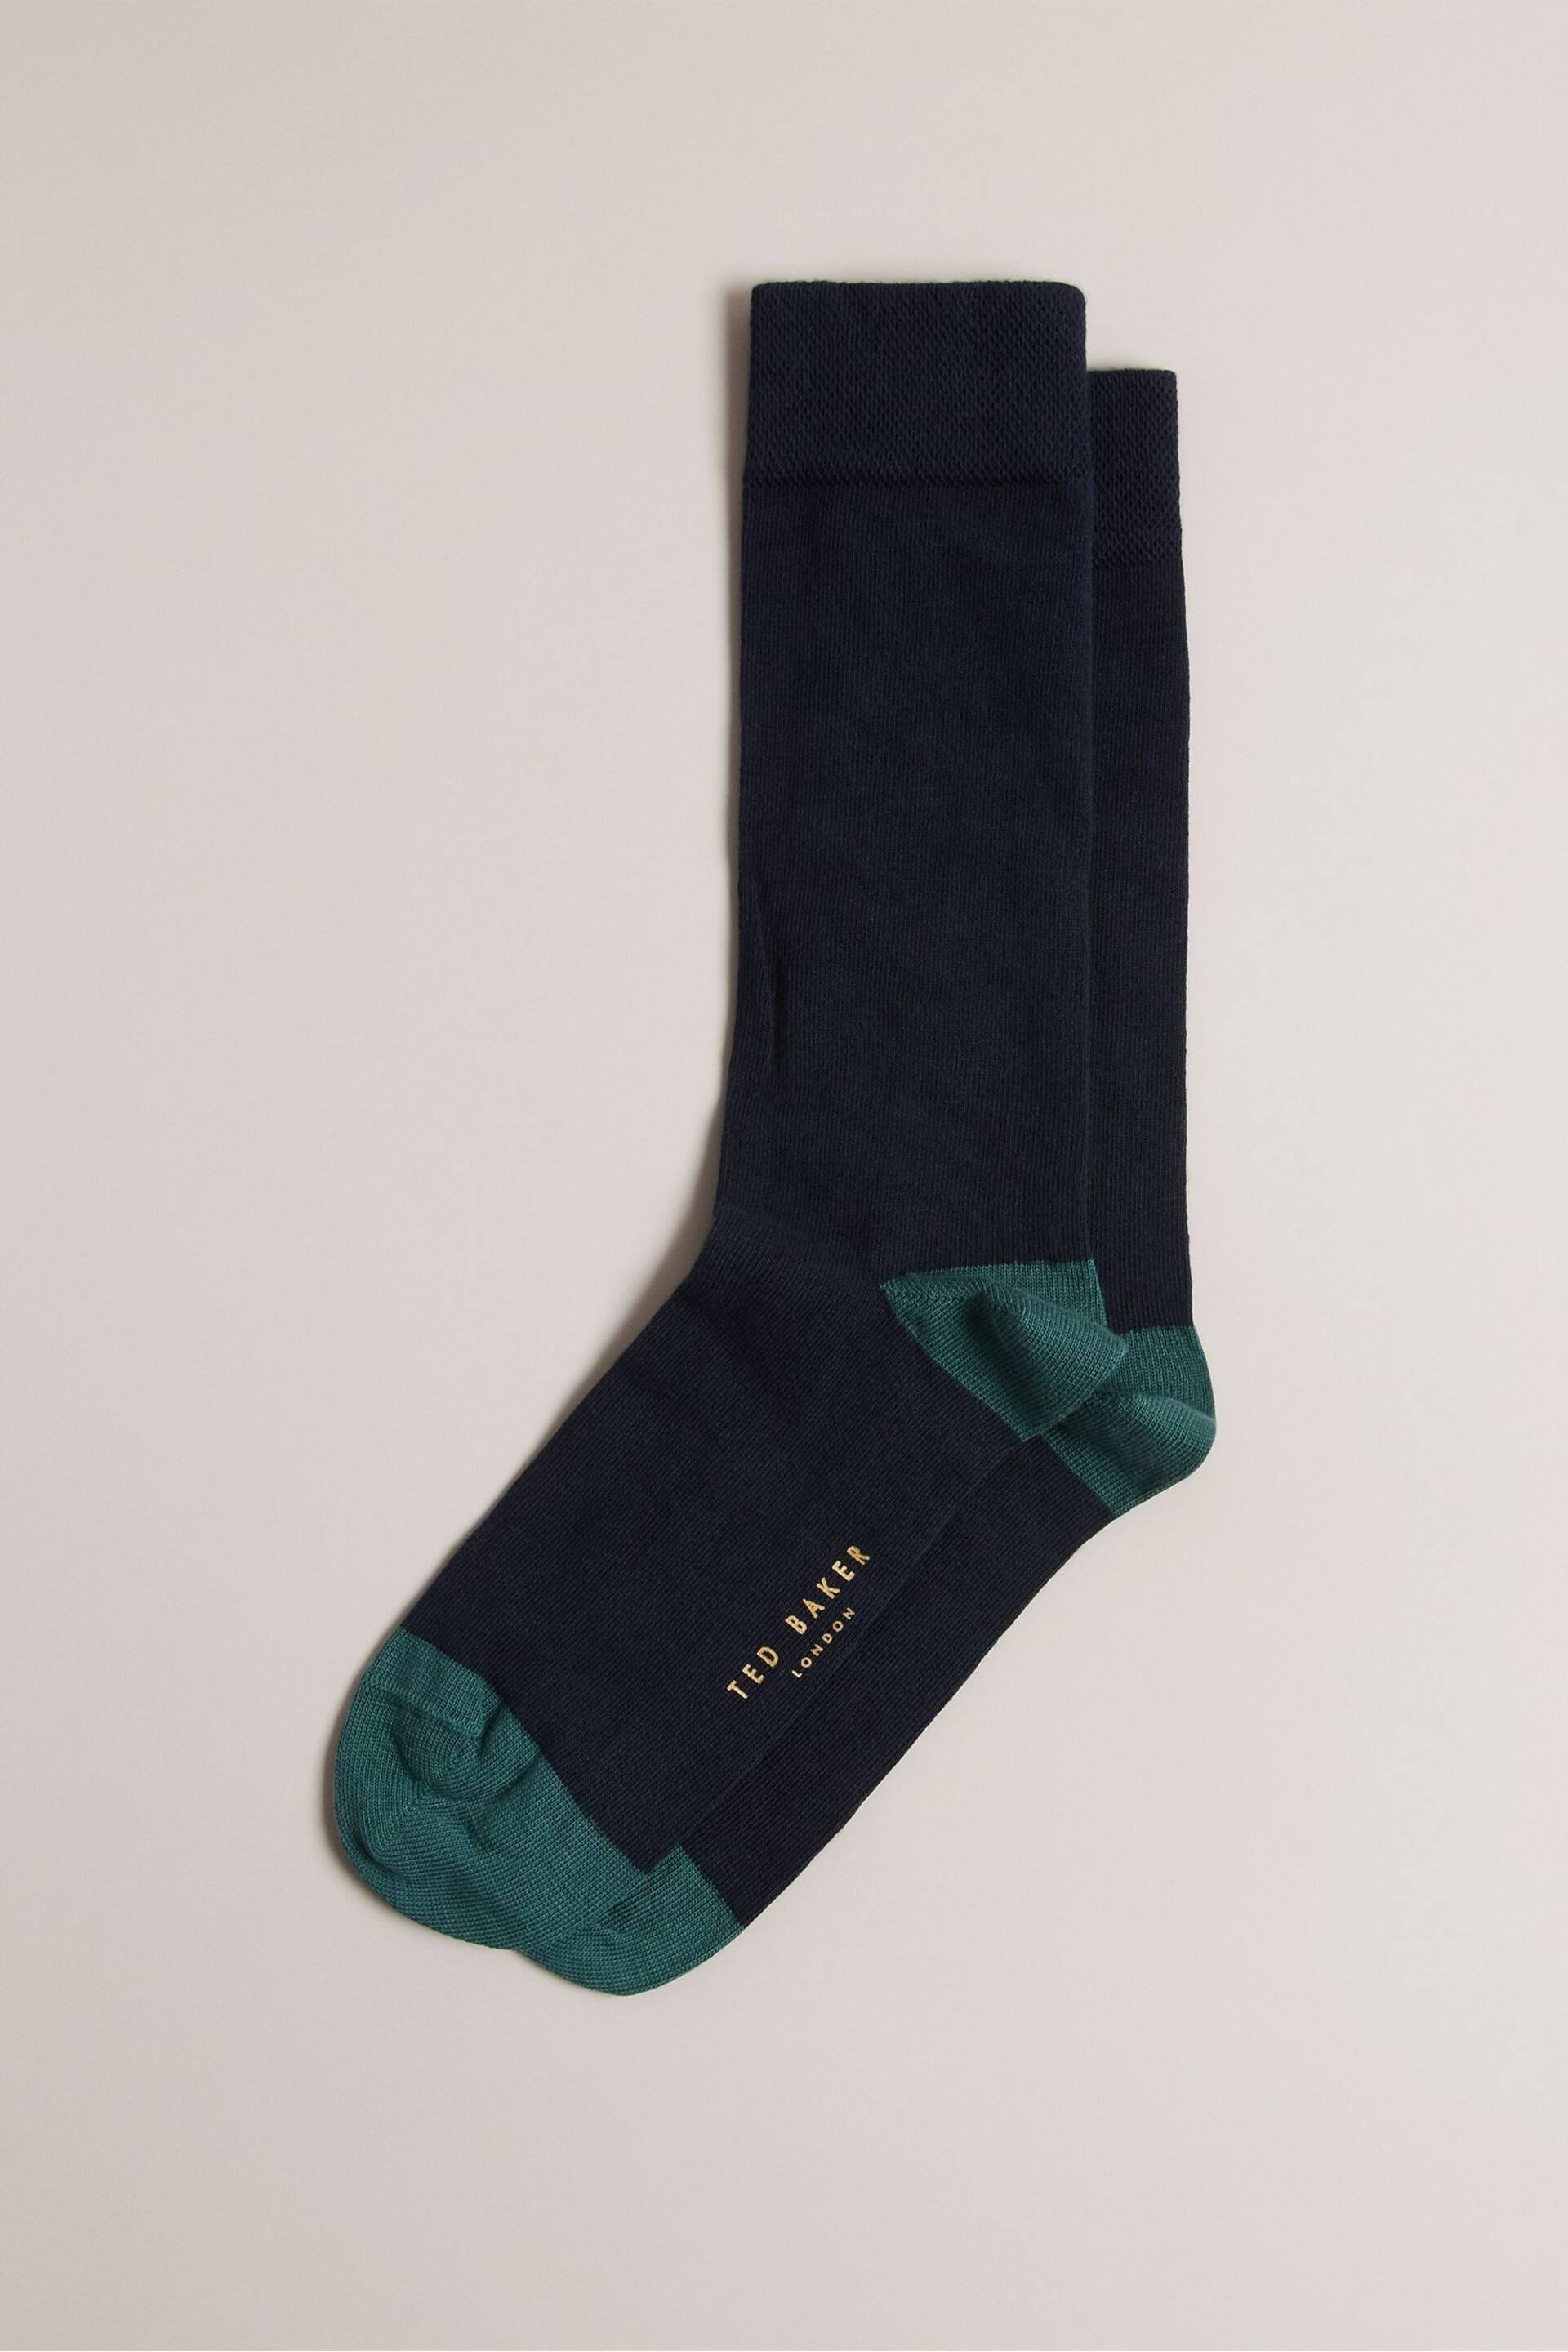 Ted Baker Blue Corecol Socks With Contrast Colour Heel And Toe - Image 1 of 3